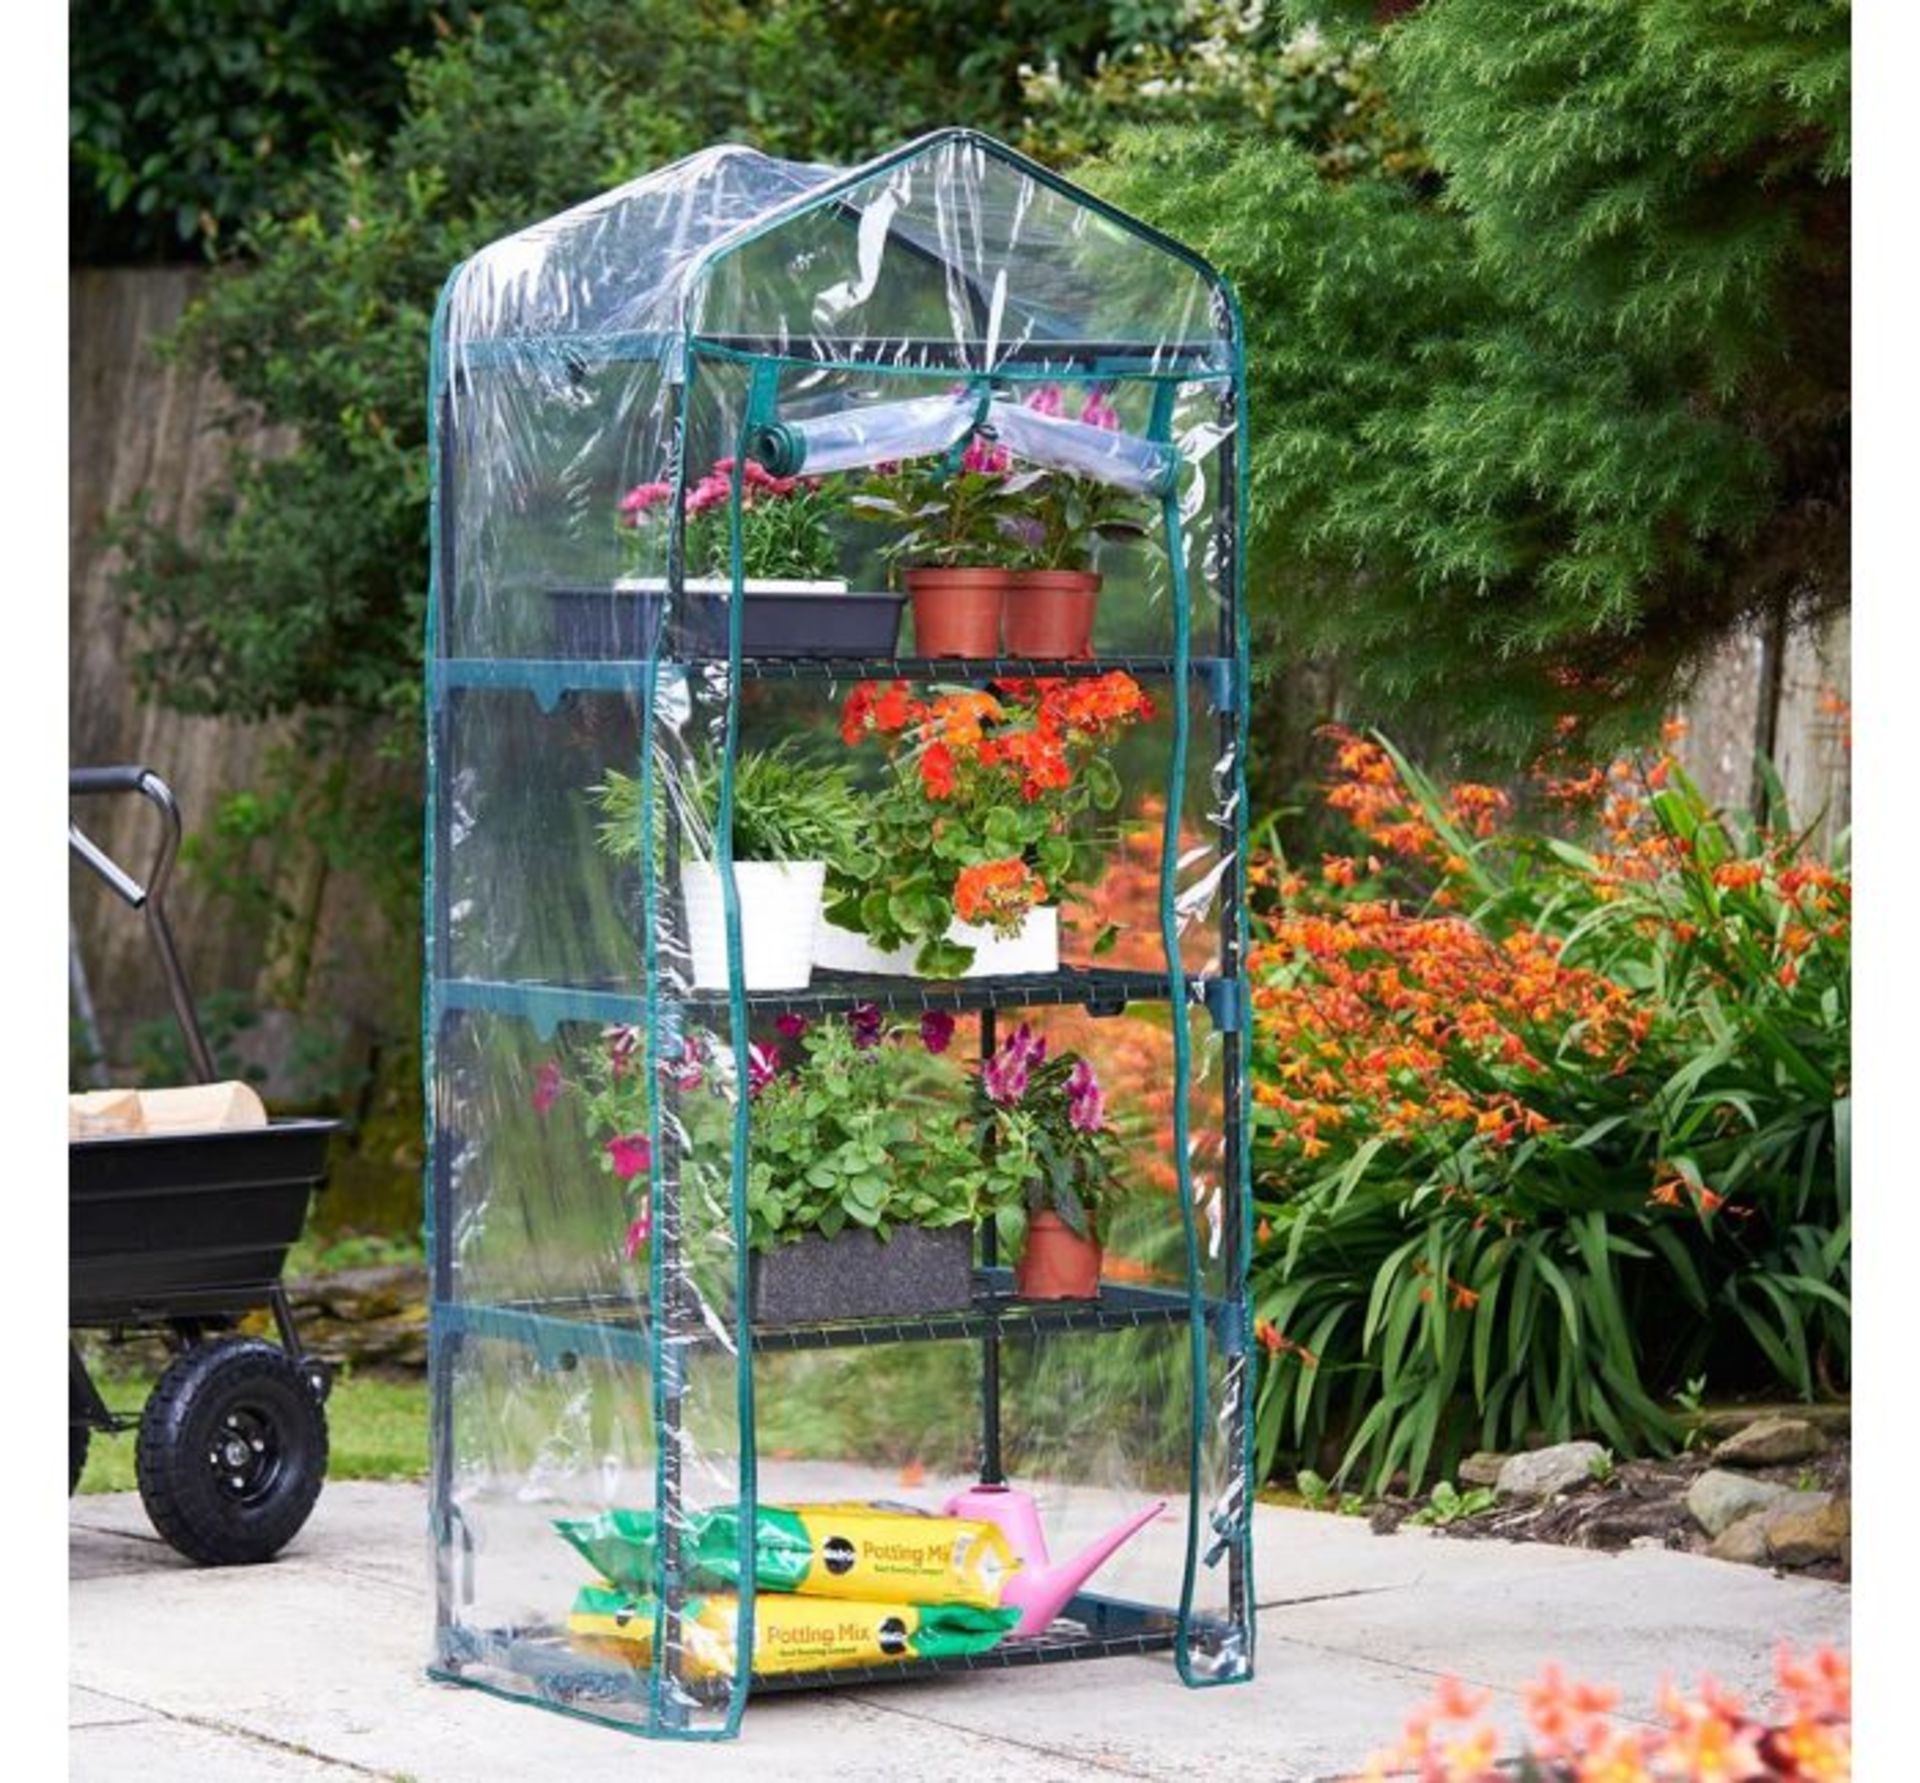 (X45) 1x 4 Tier Mini Greenhouse. keep conditions controlled for your plants, seeds and seedlings w